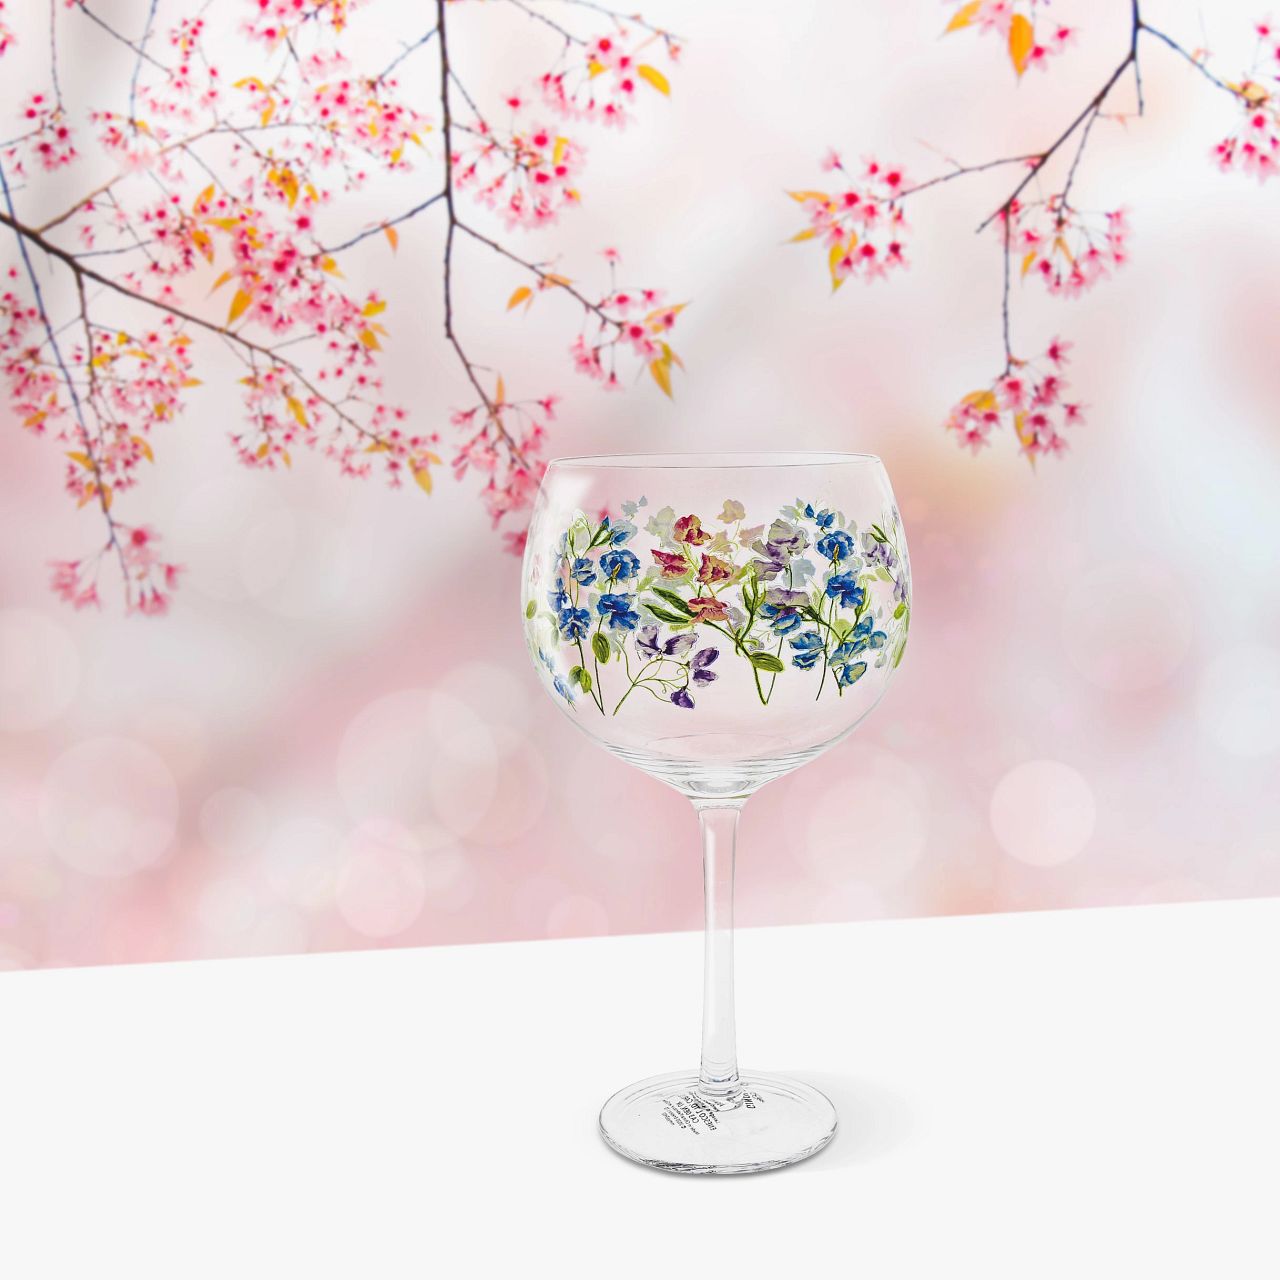 Ginology Sweet Pea Copa Gin Glass  A beautiful vintage style gin glass featuring pretty sweet peas in pinks, blues and purple. A loving gift of appreciation for someone special, pair with a fragrant floral gin for a gift full of sweetness.